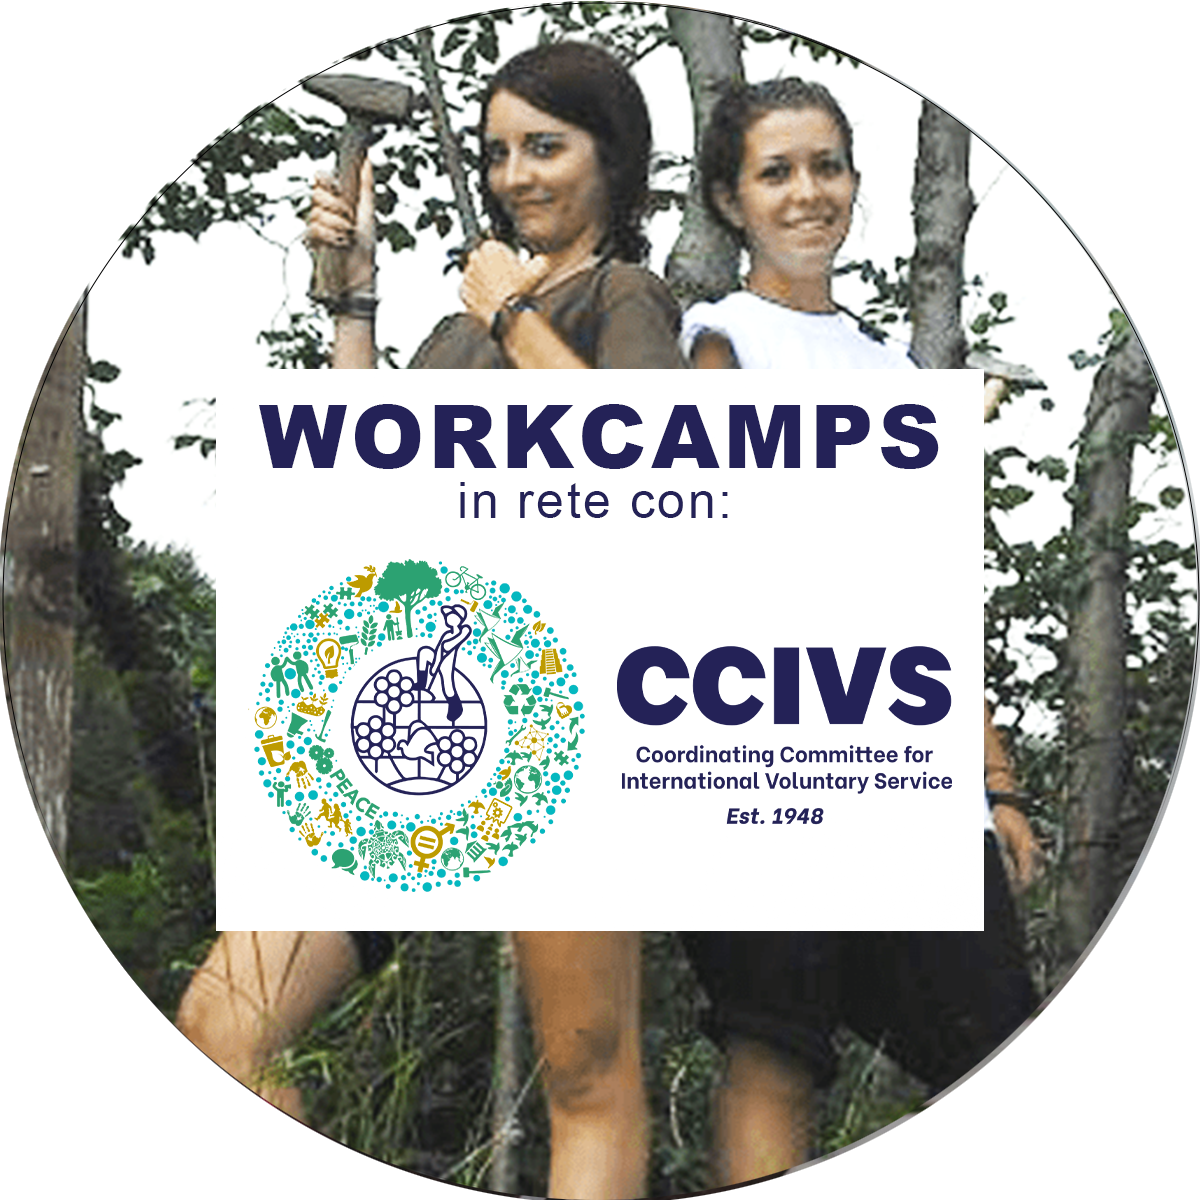 WORKCAMPS